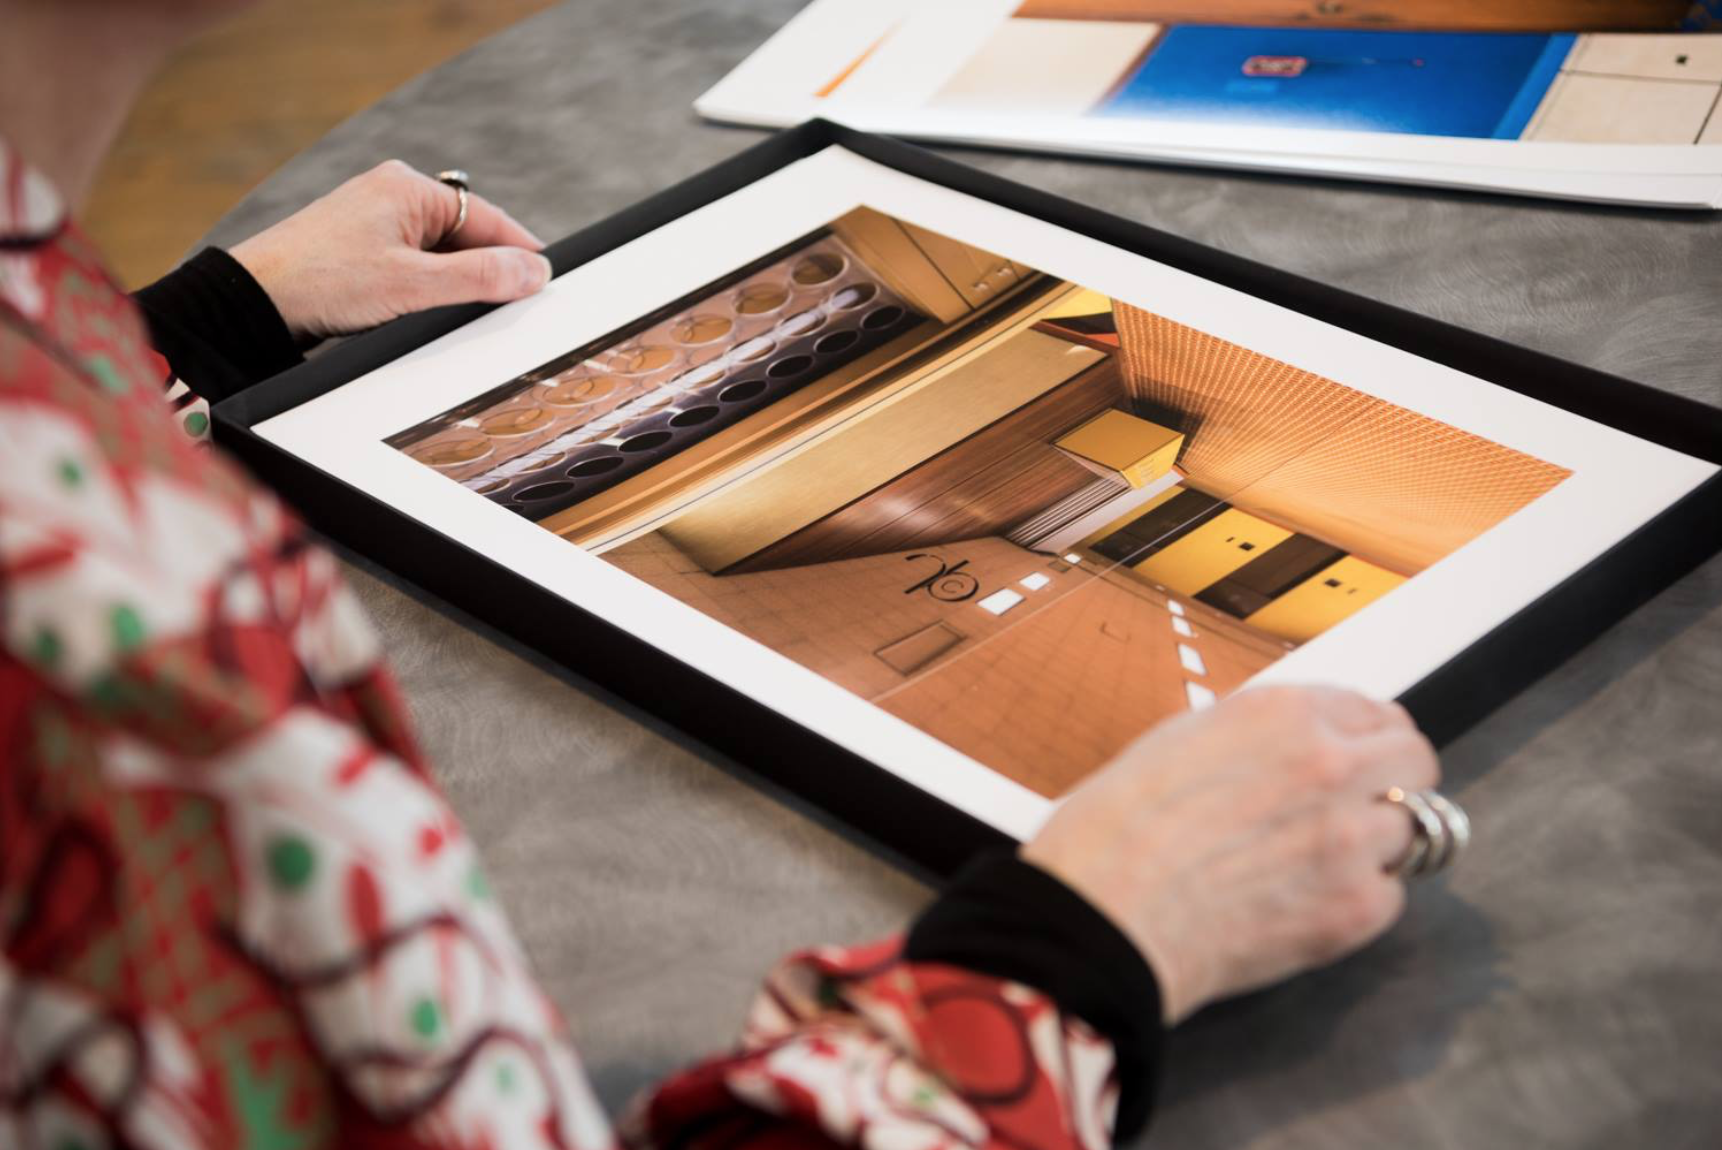 Photograph taken from behind and to the right of a person holding a framed print of a photograph of an interior on a table, during a portfolio review.